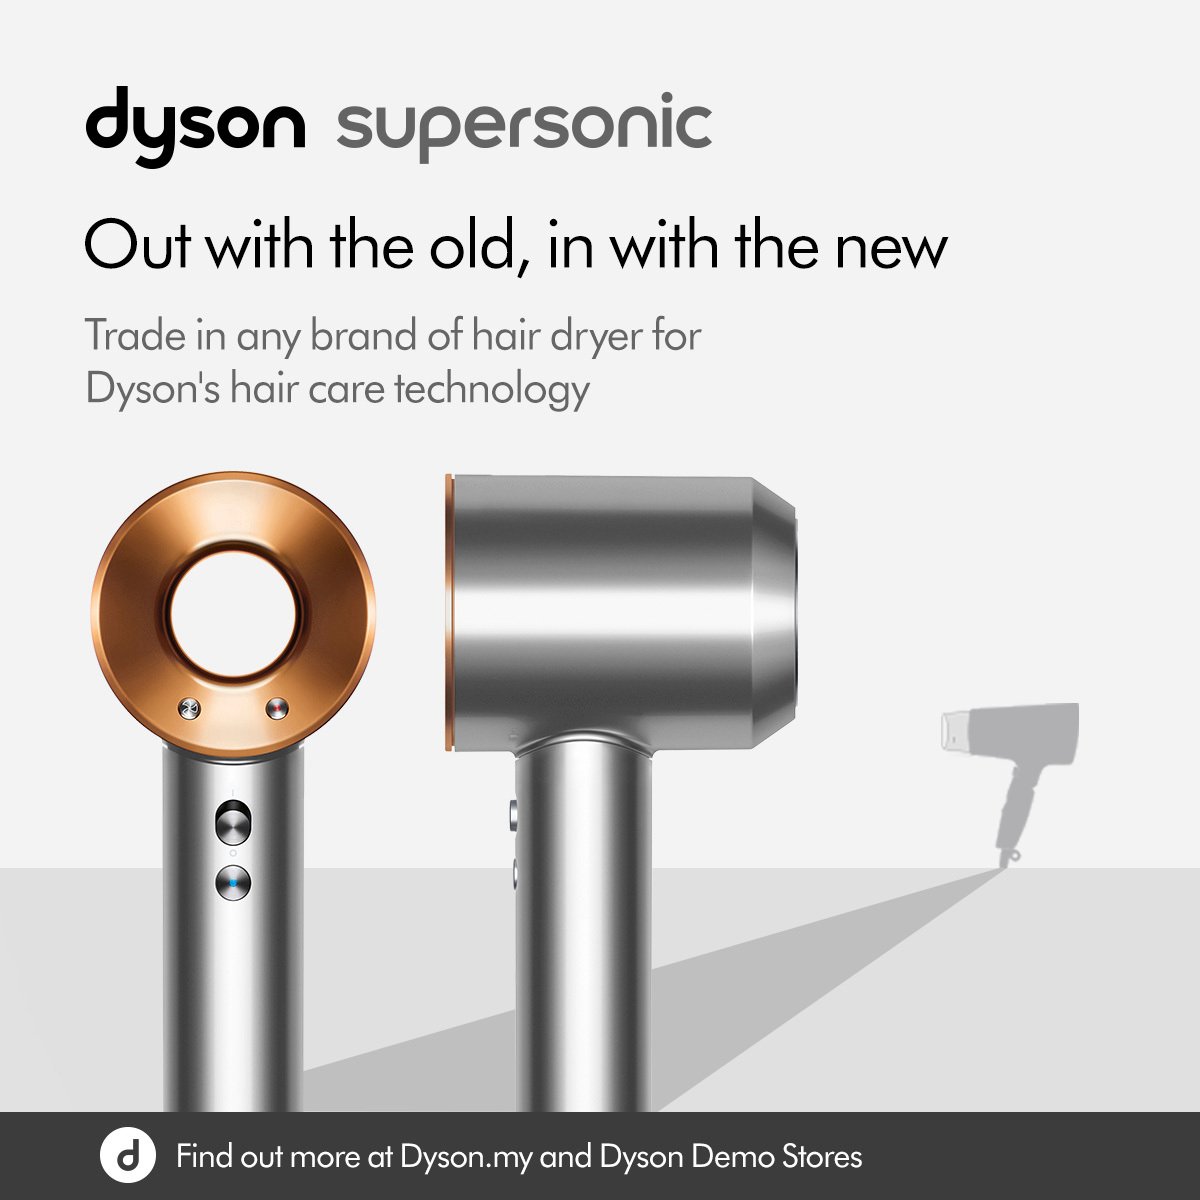 dyson trade in supersonic.jpg